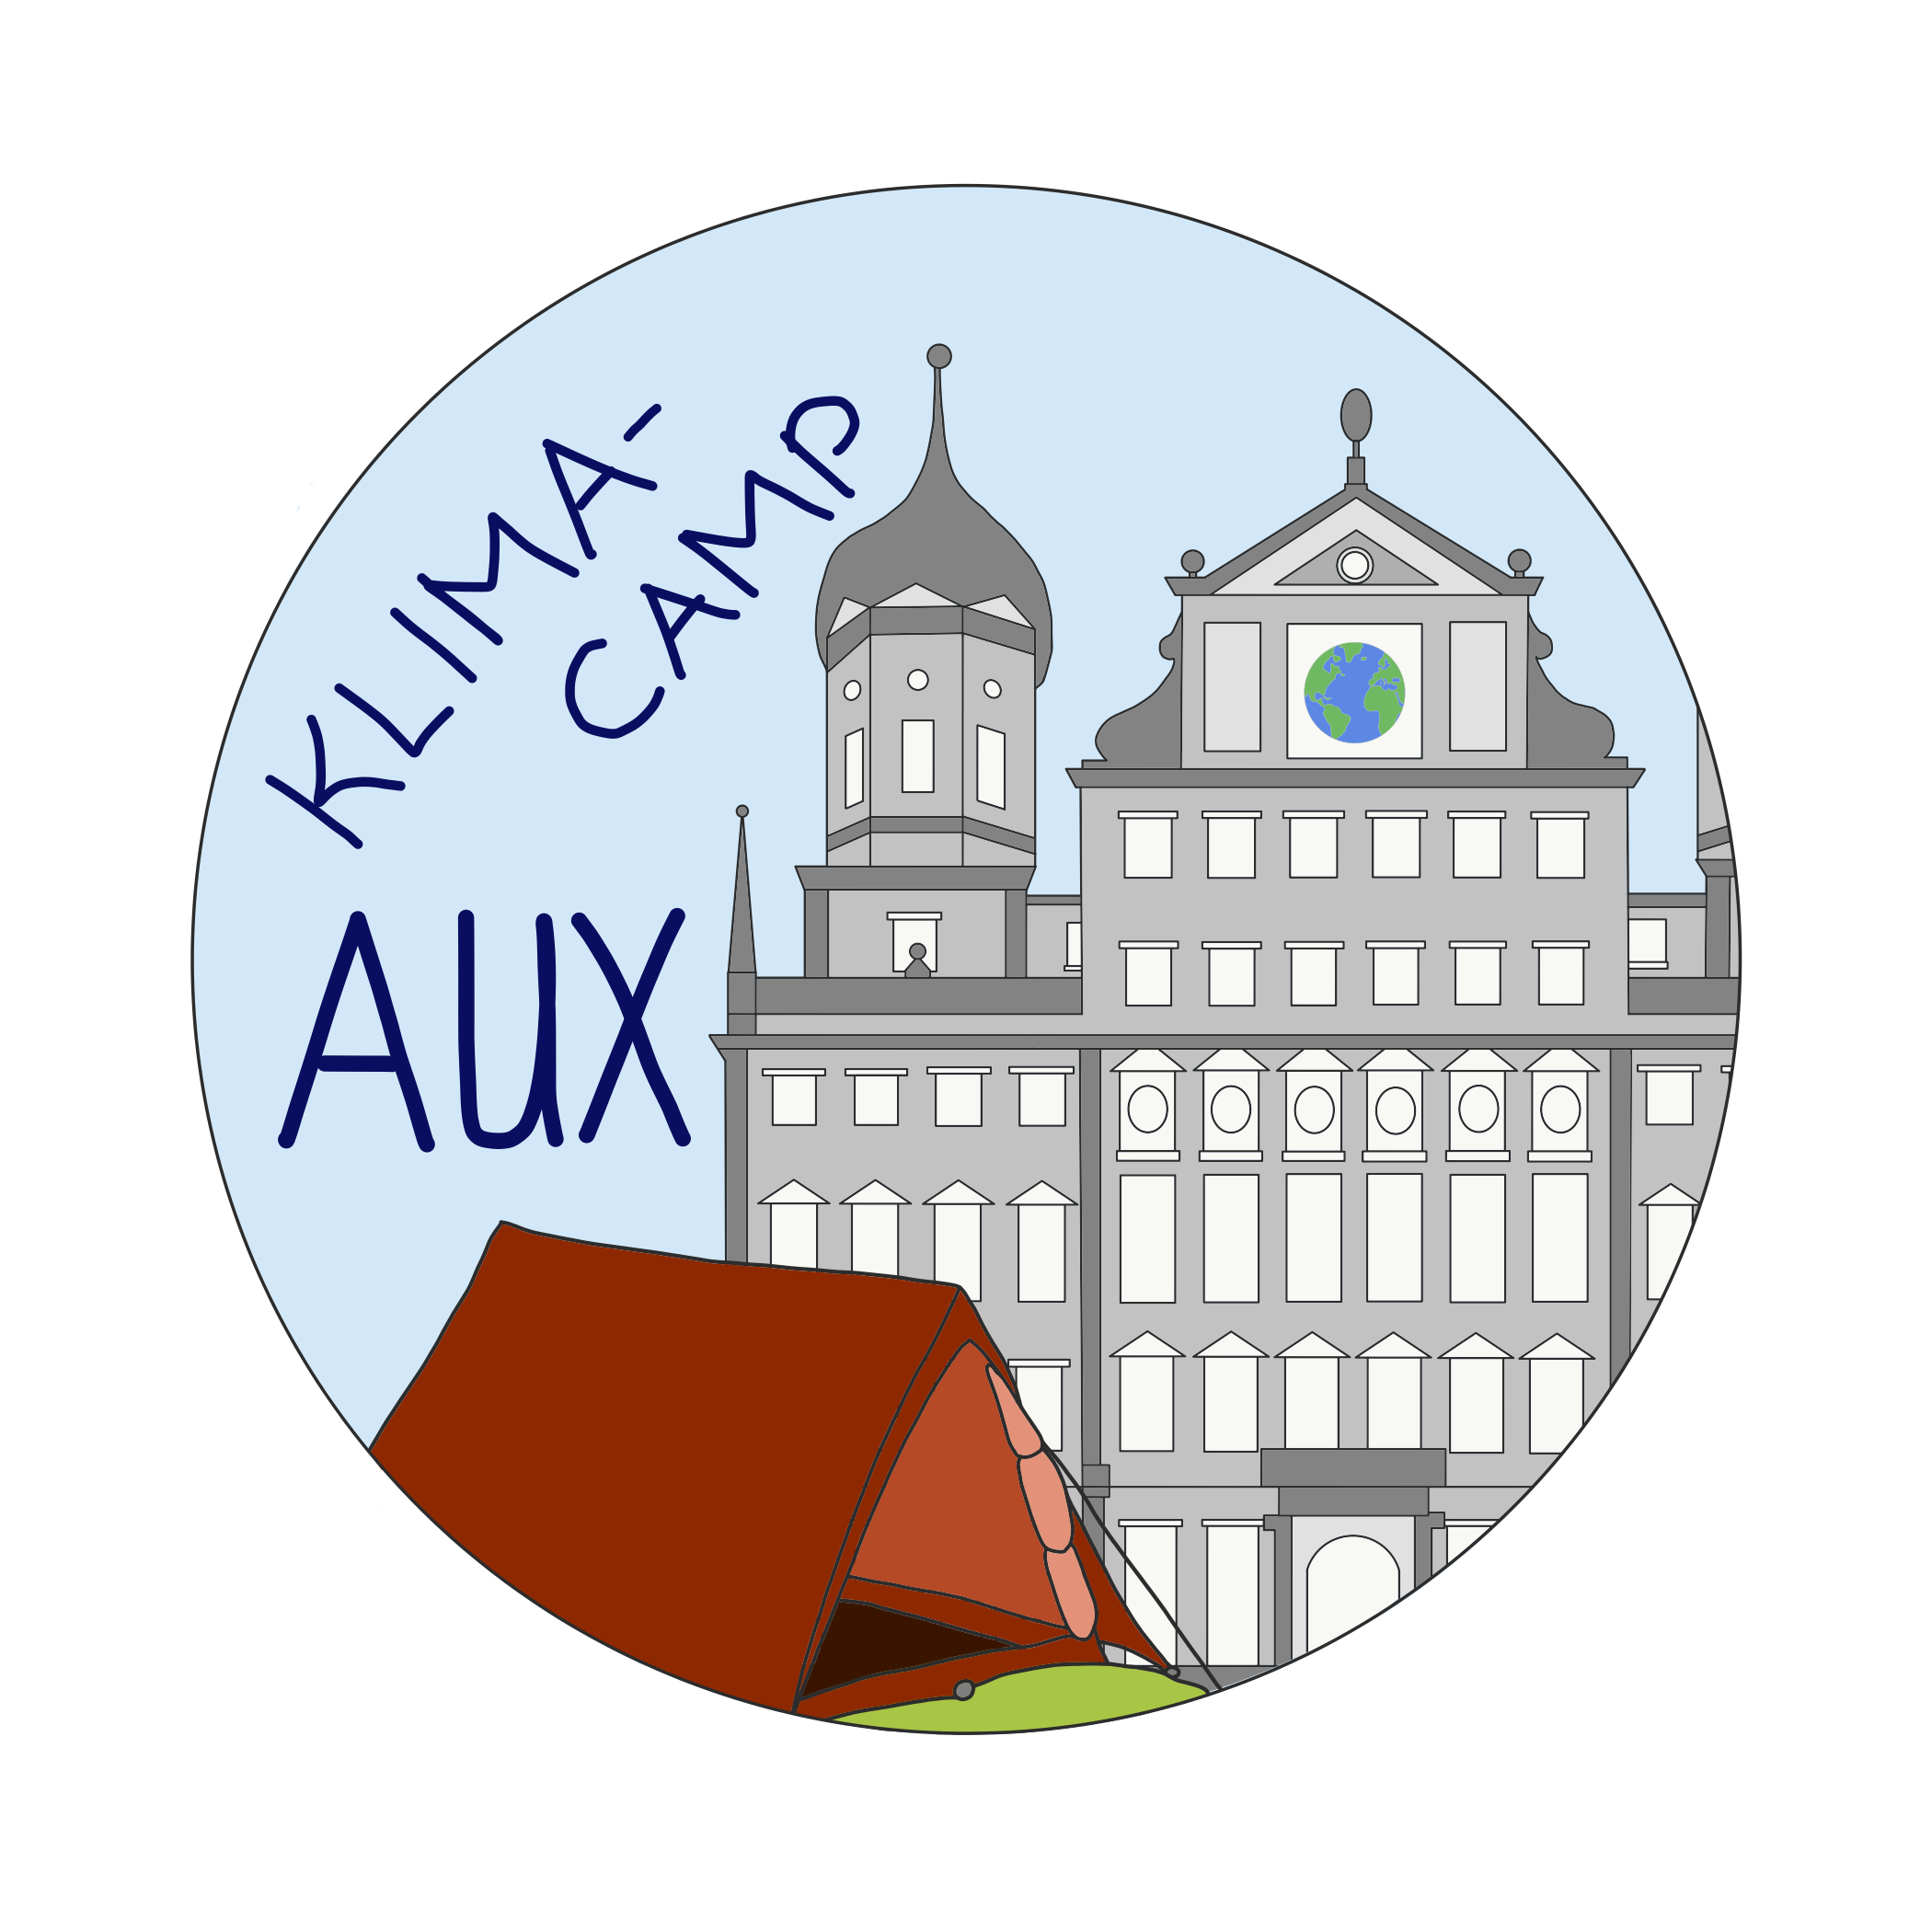 The logo of the Klimacamp Augsburg: A tent in front of the town hall. A window in the town hall shows the earth.